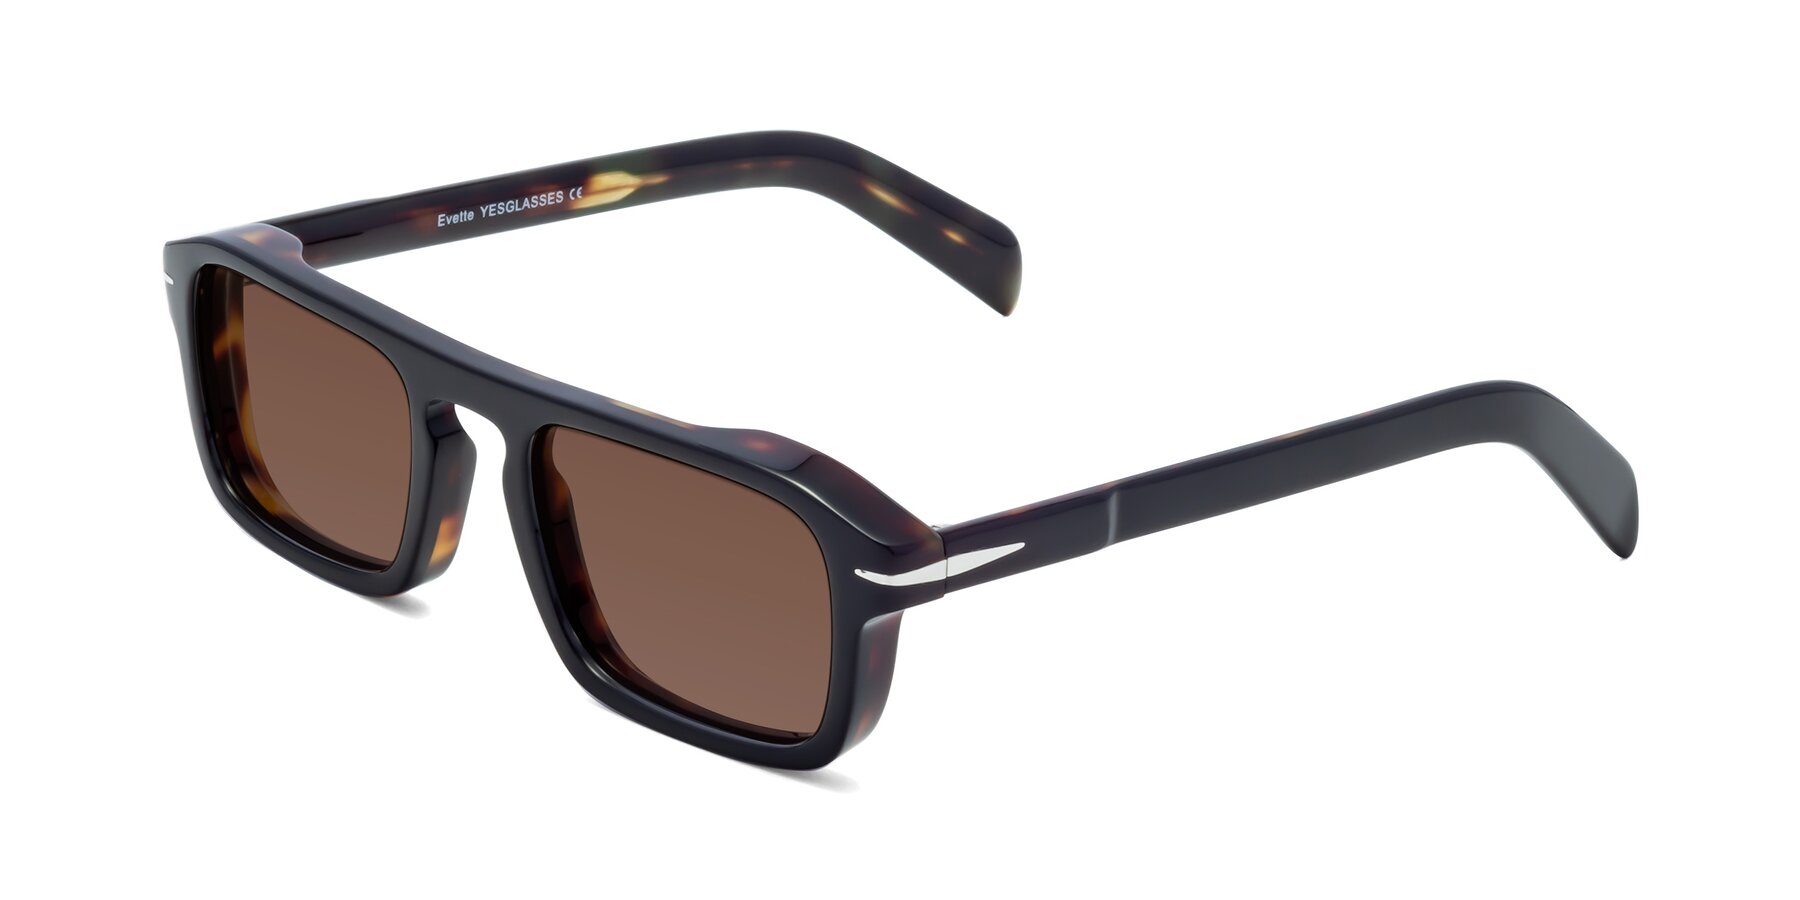 Angle of Evette in Black-Tortoise with Brown Tinted Lenses